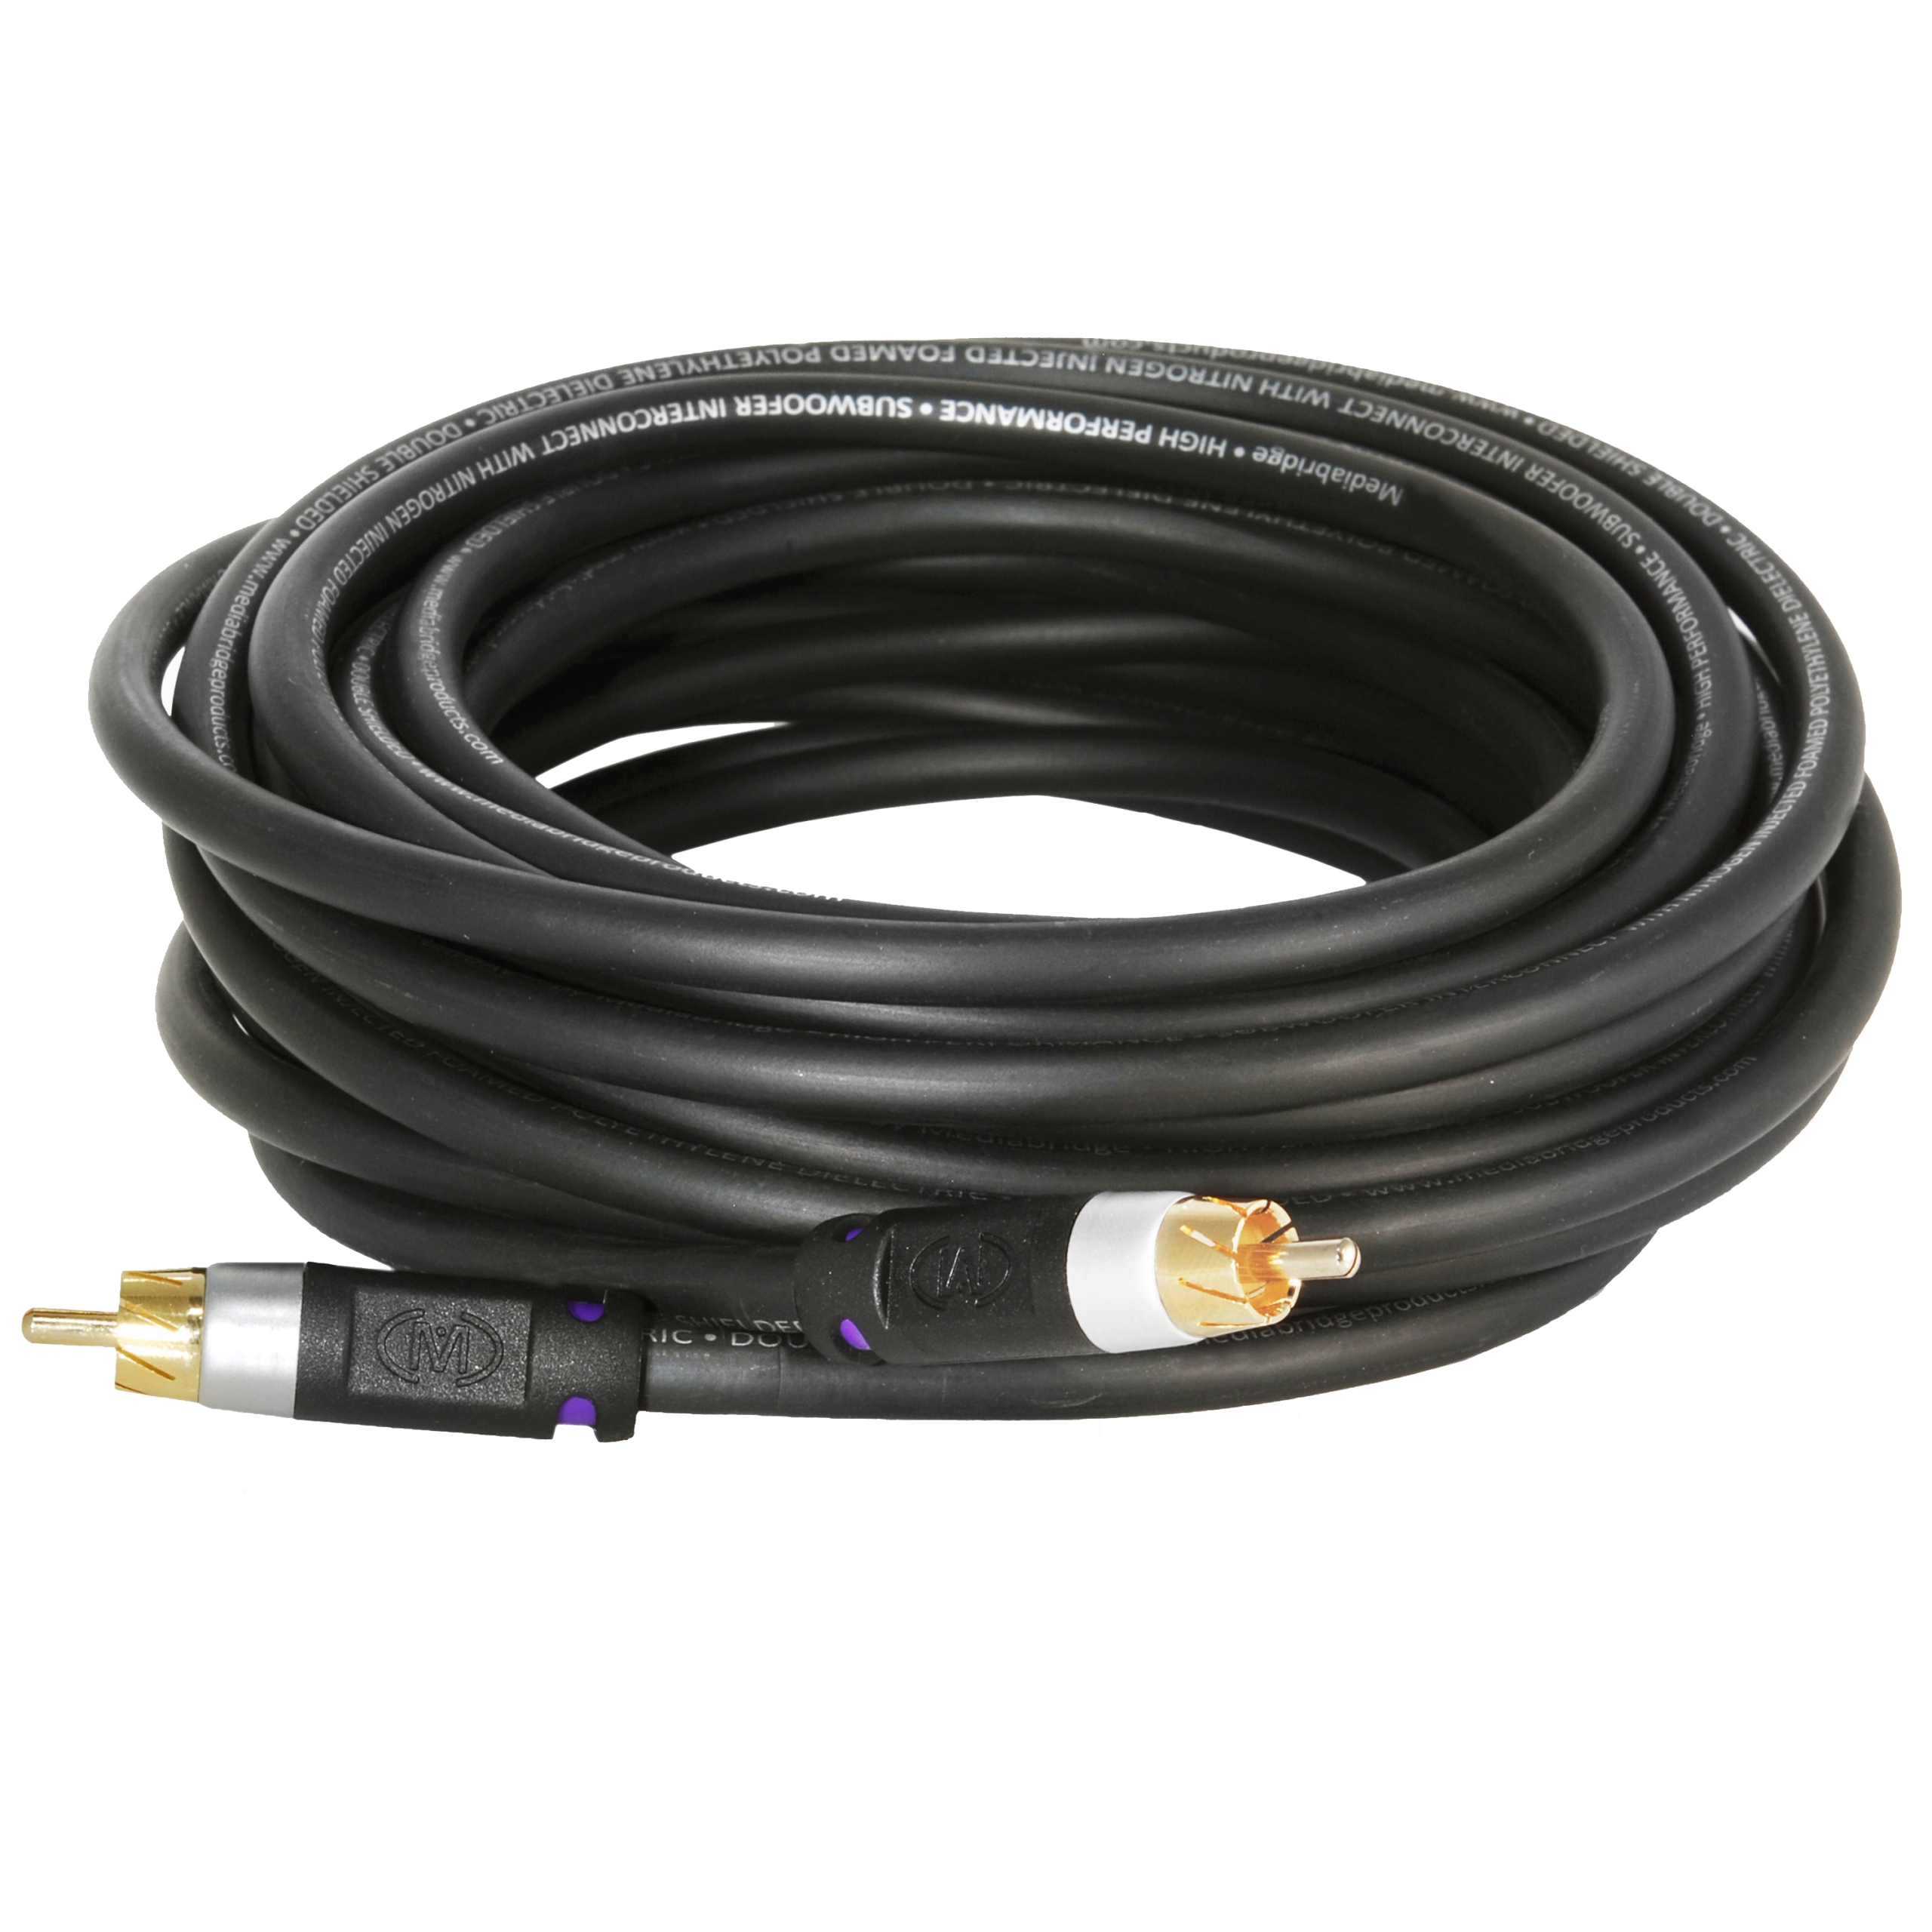 Mediabridge Ultra Series Subwoofer Cable (75 Feet) - Dual Shielded with  Gold Plated RCA to RCA Connectors - Black - (Part# CJ75-6BR-G1)